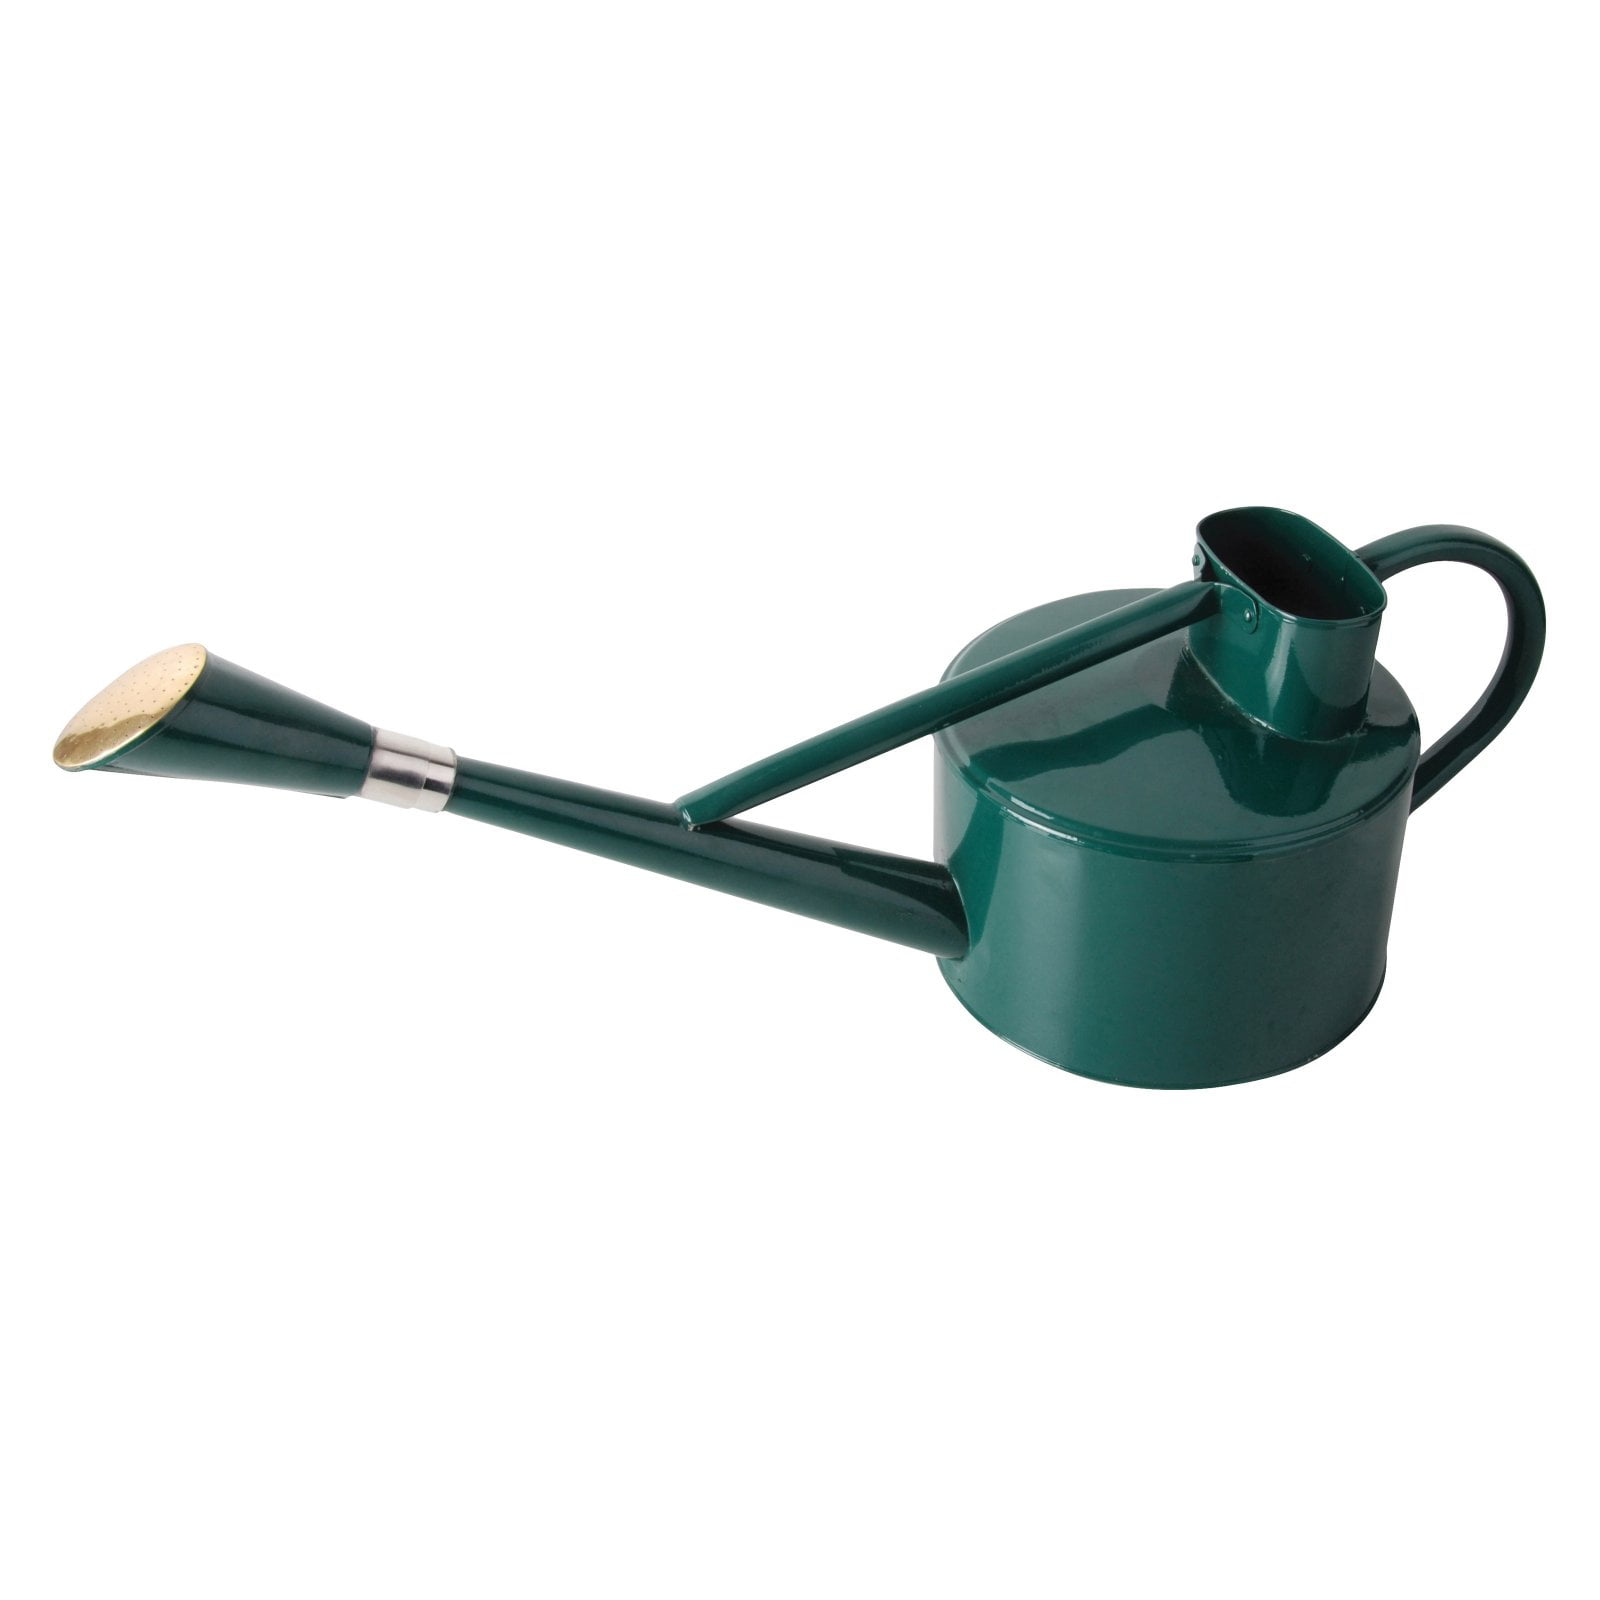 Freehawk Watering Can Stainless Steel Watering Pot with Long Spout for Indoor and Outdoor Plants or Flowers Watering 1L/33oz 